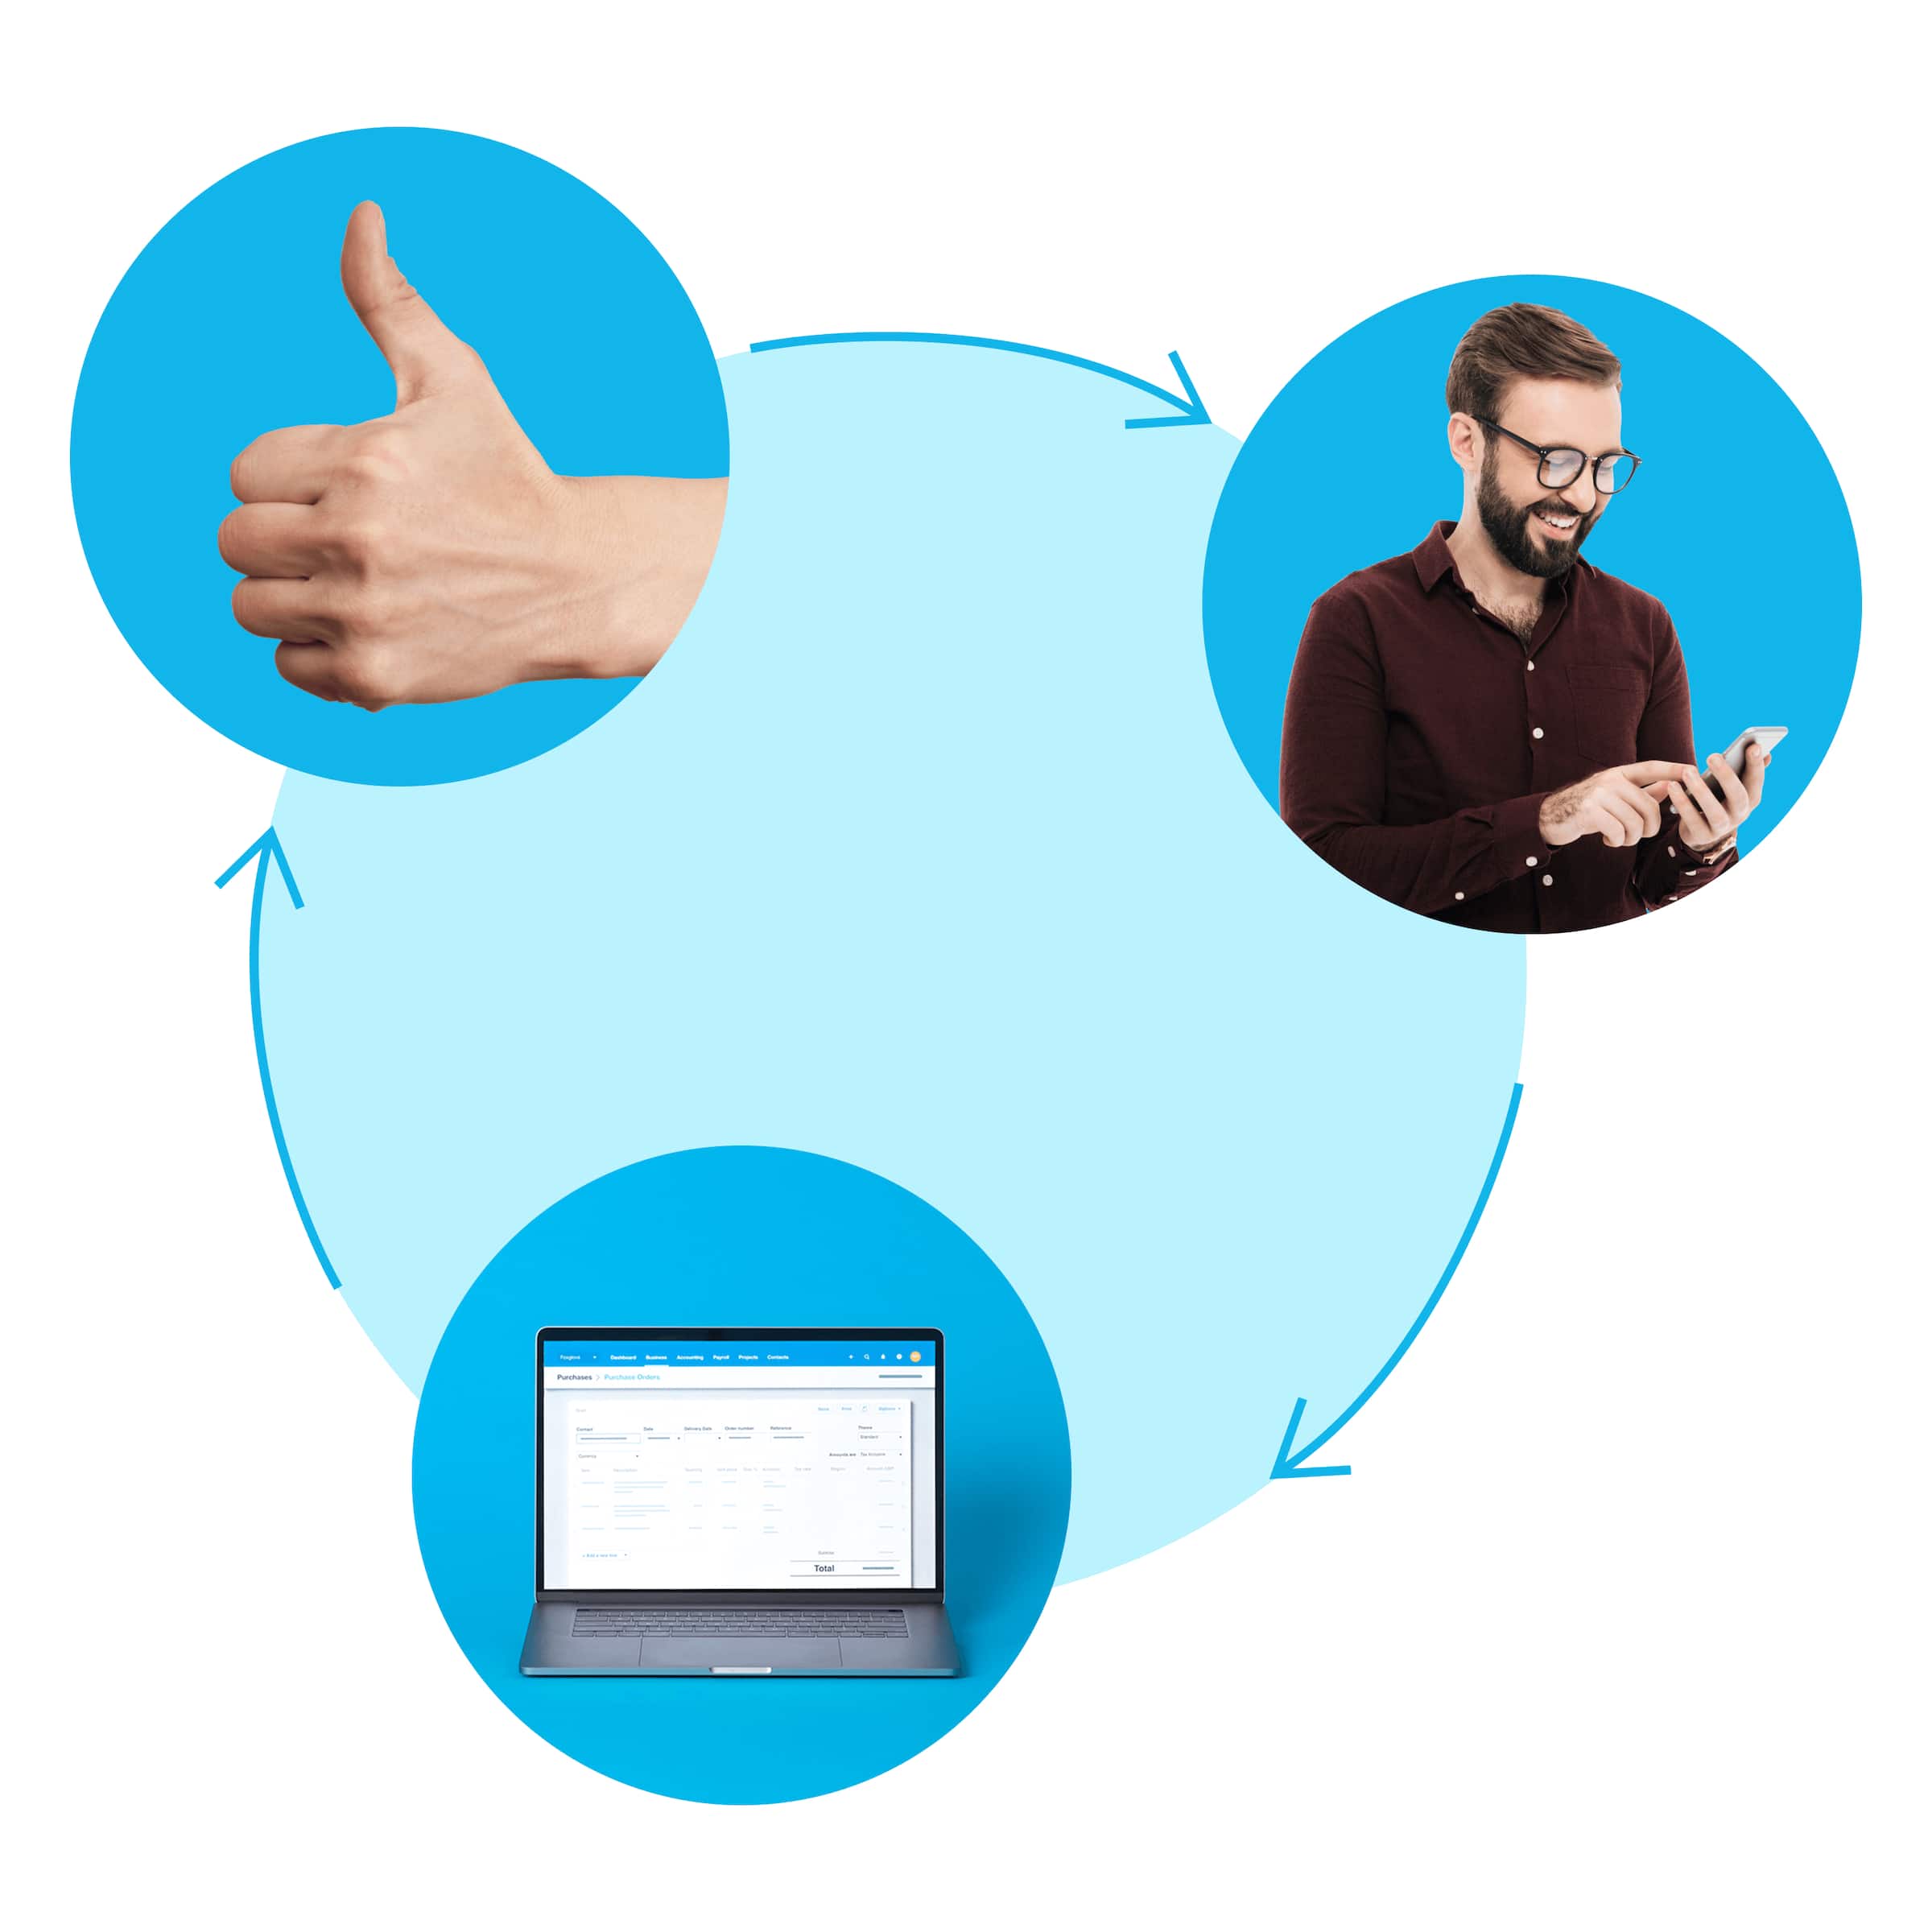 A circular flow chart shows a mobile device, a laptop, and a confirming thumbs up.